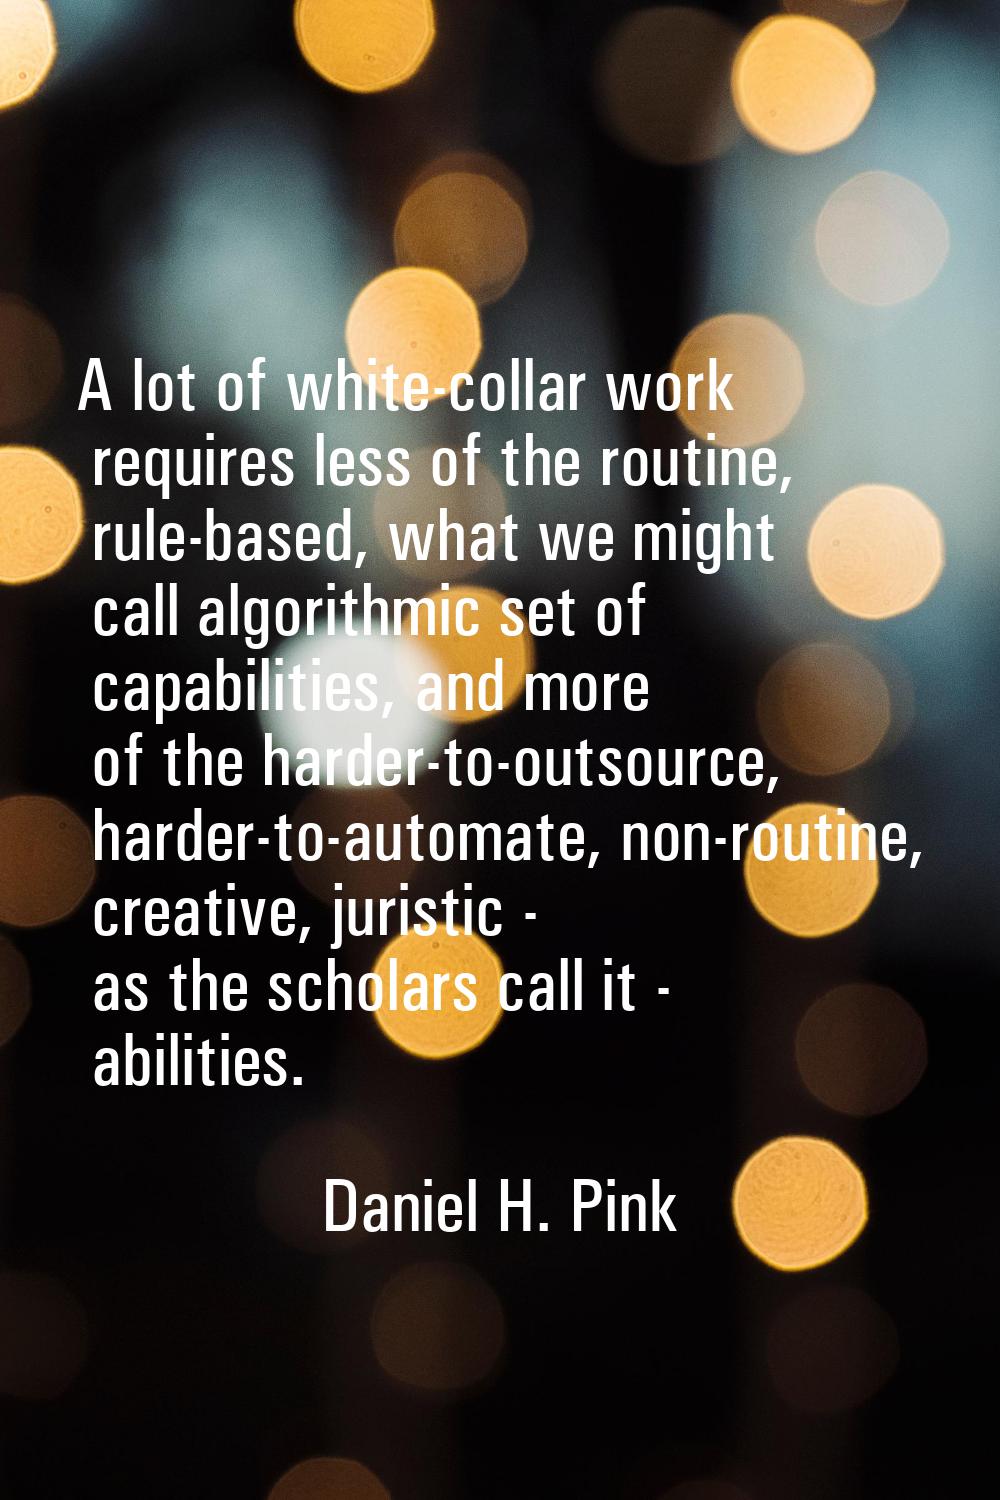 A lot of white-collar work requires less of the routine, rule-based, what we might call algorithmic